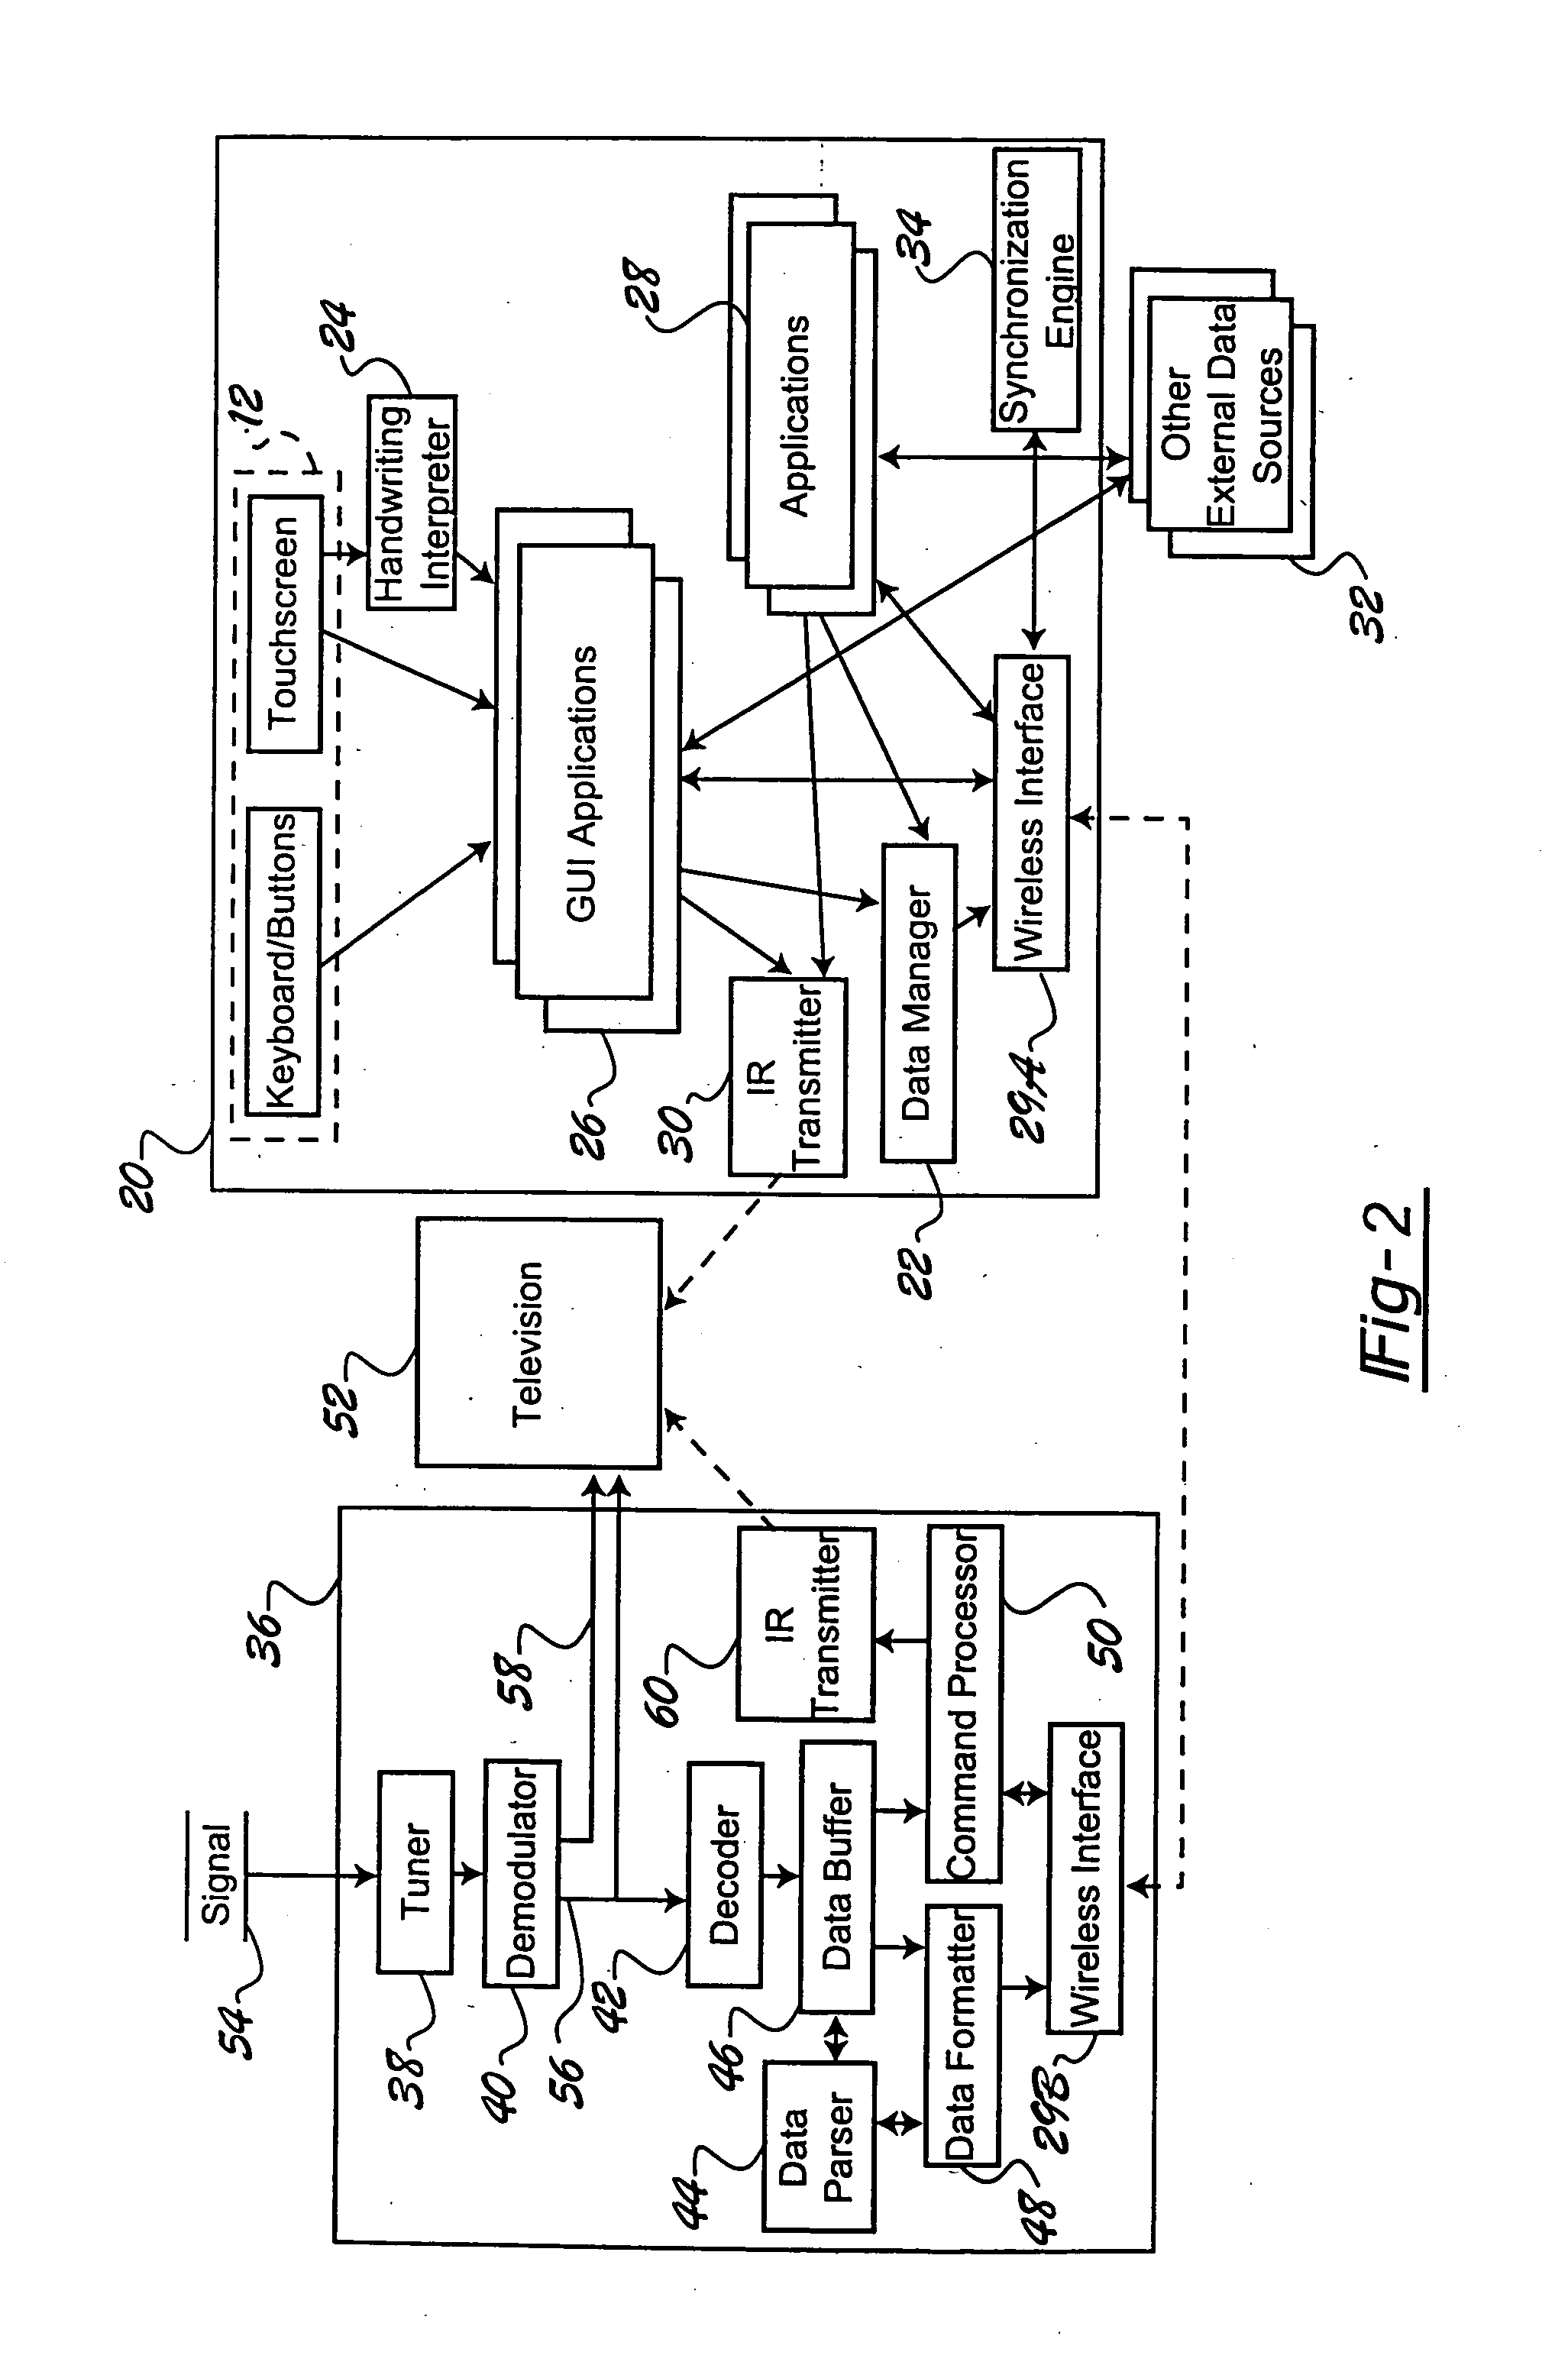 Utilization of data broadcasting technology with handheld control apparatus